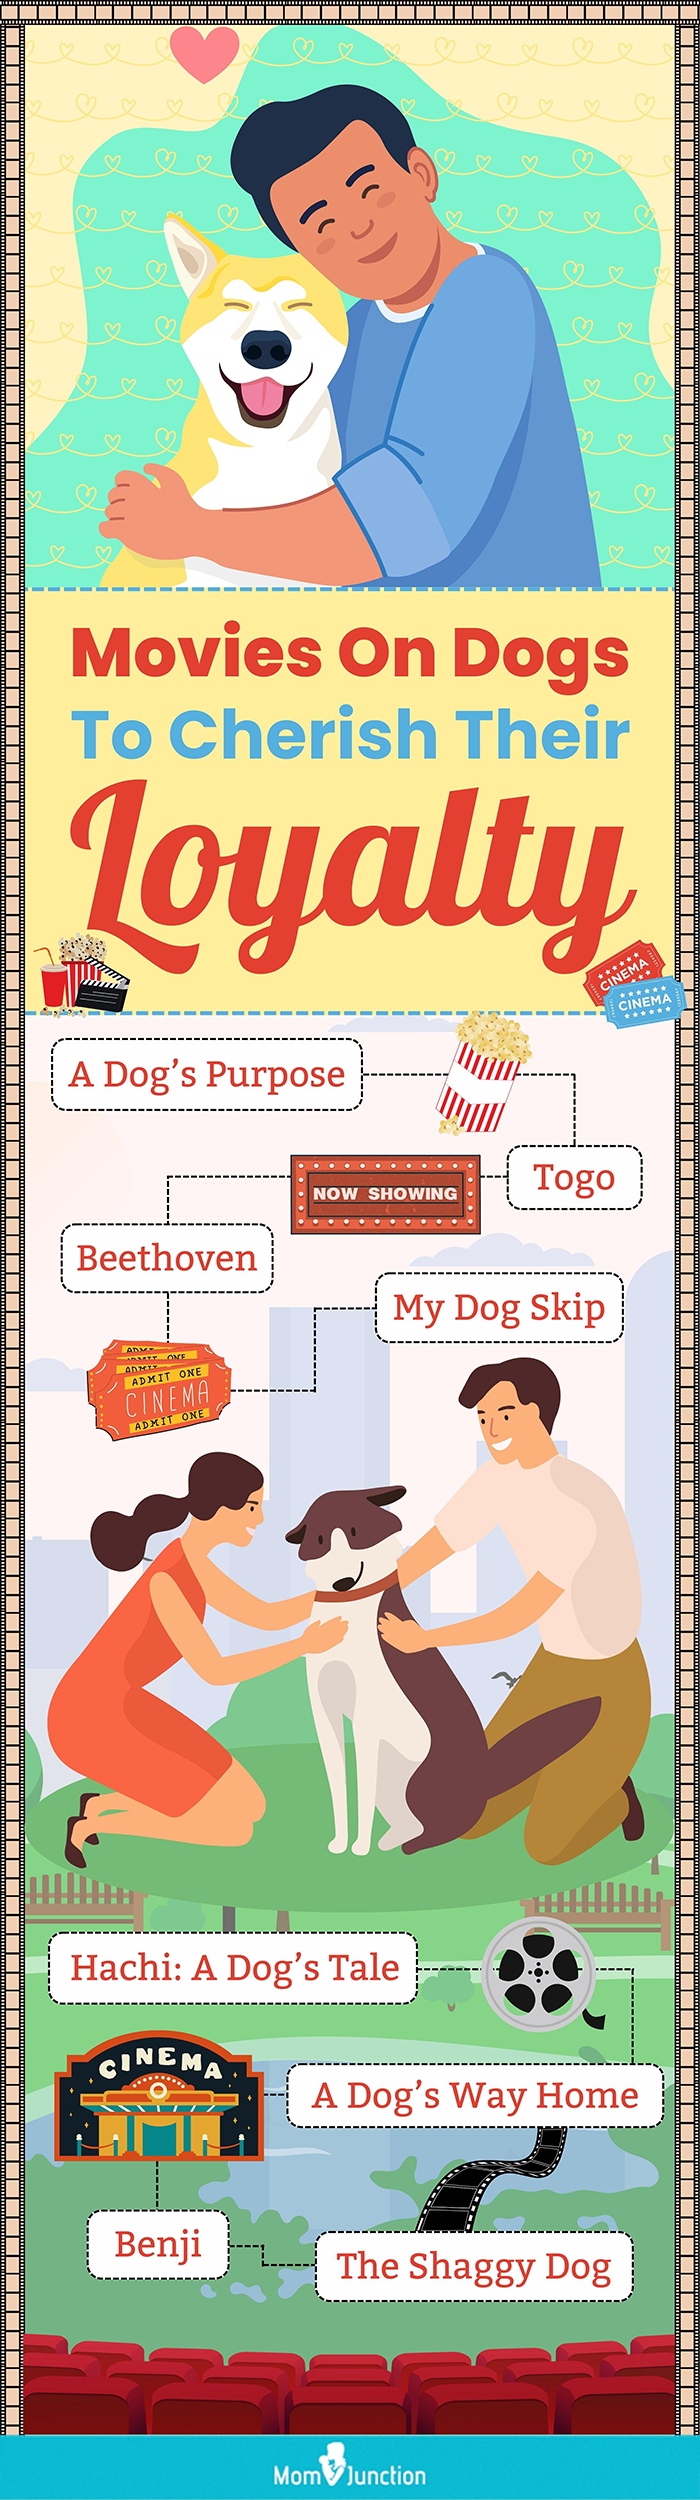 movies on dogs to cherish their loyalty [infographic]